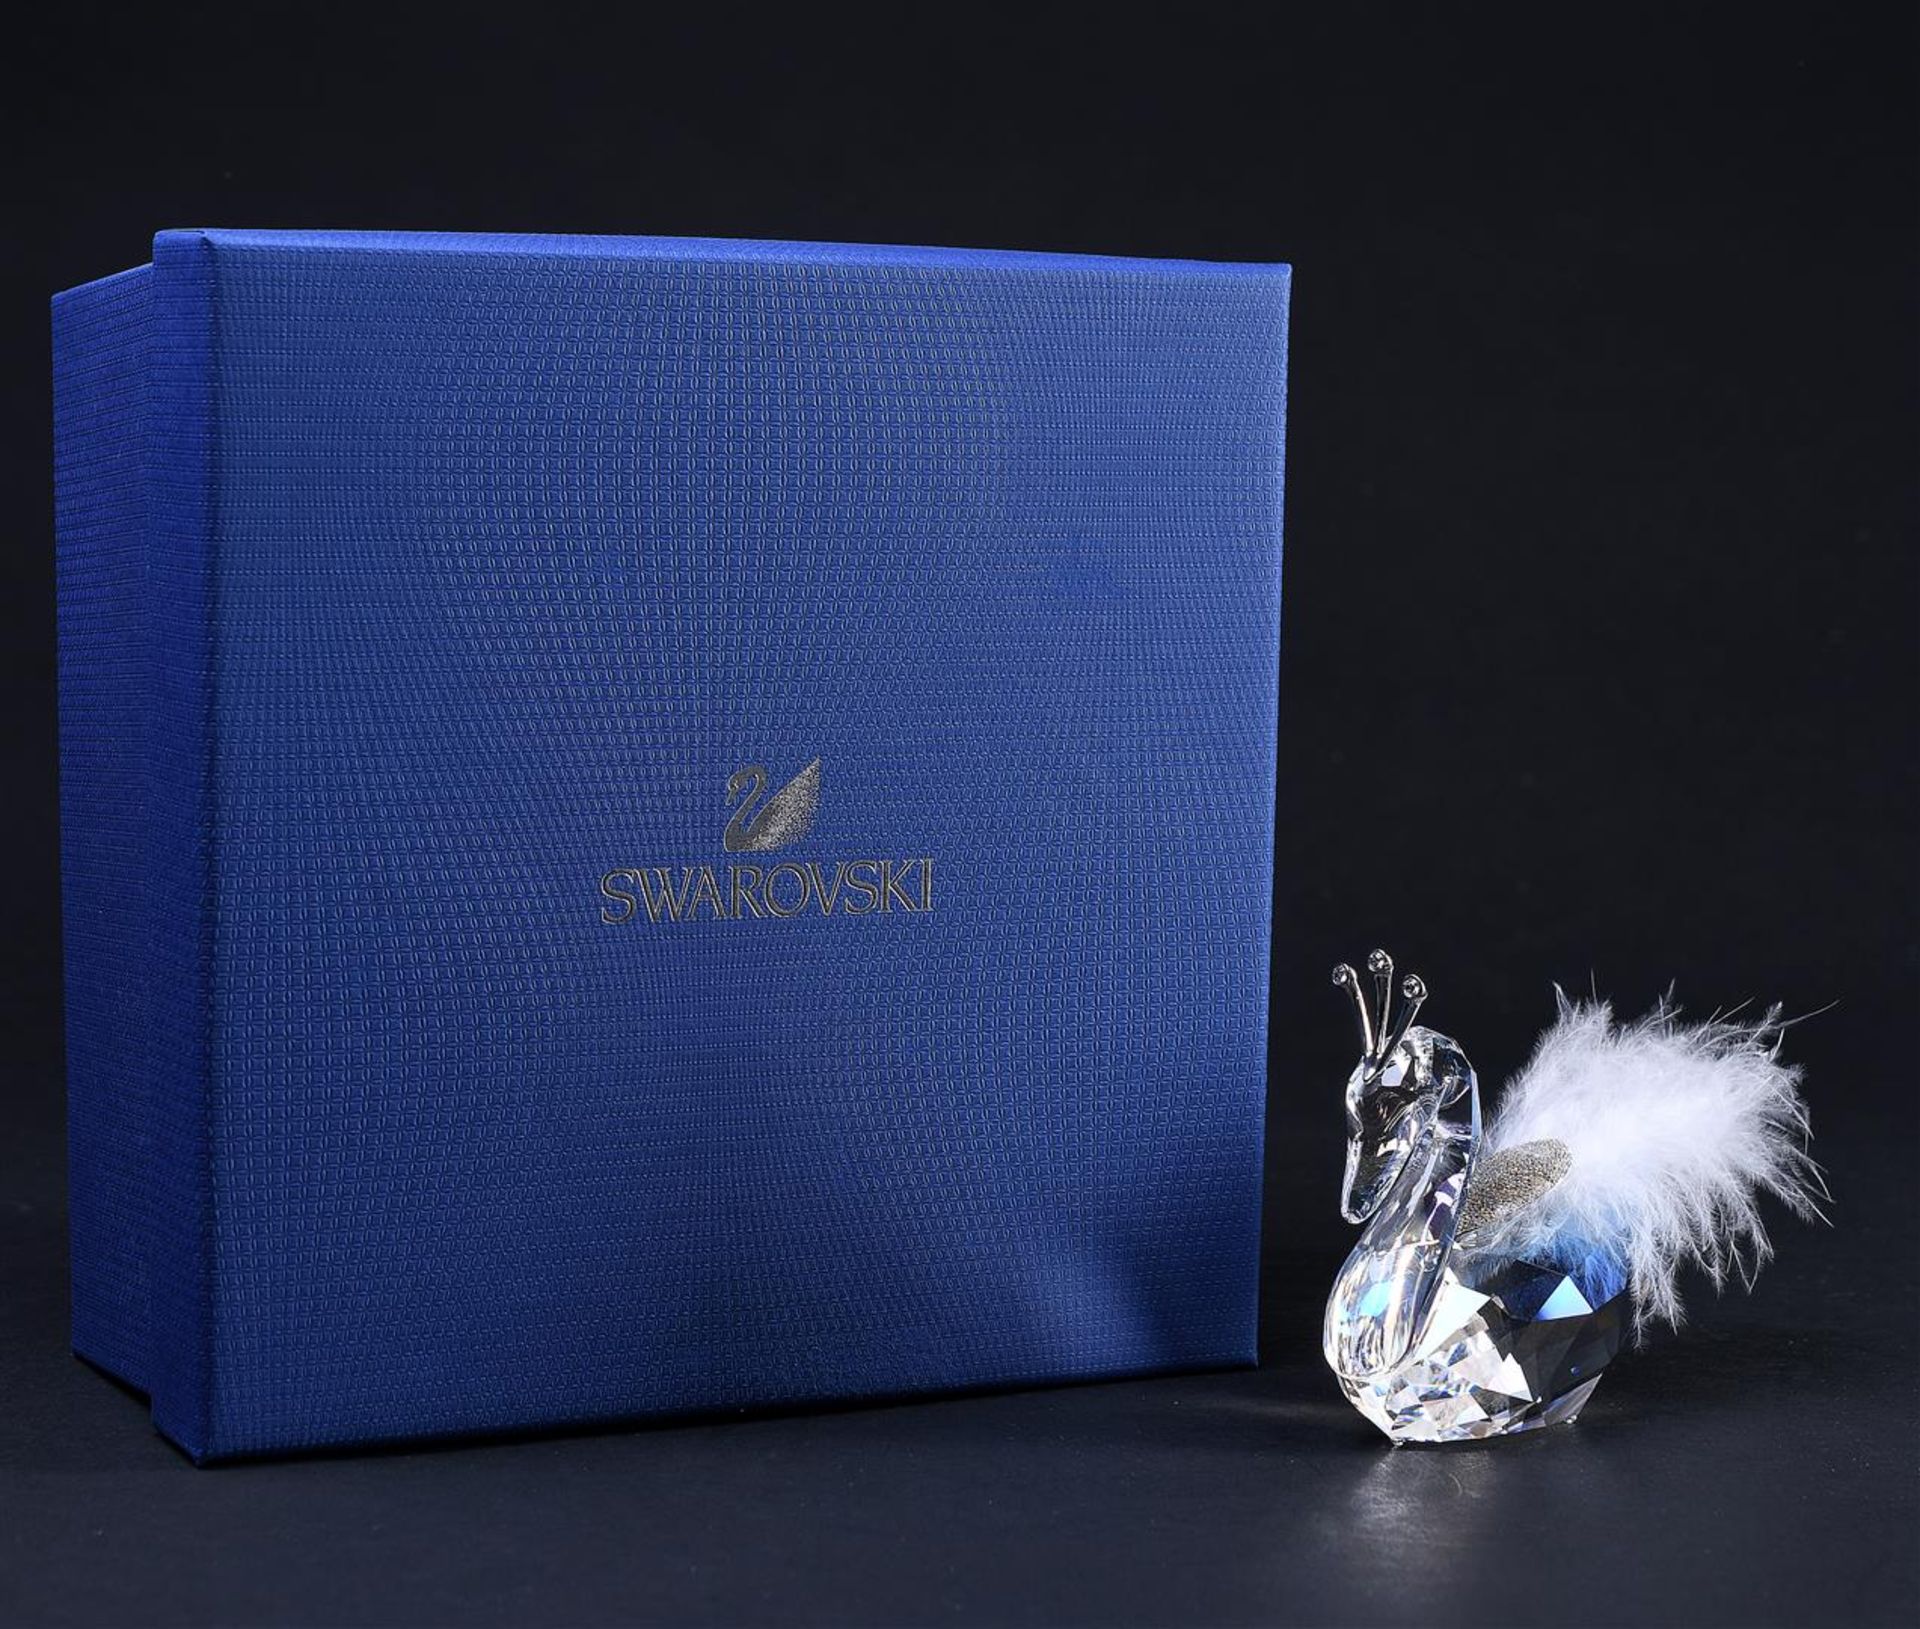 Swarovski,winter swan Year of publication 2010, 1054571. Includes original box and glass shoe.
H. 8, - Image 4 of 4